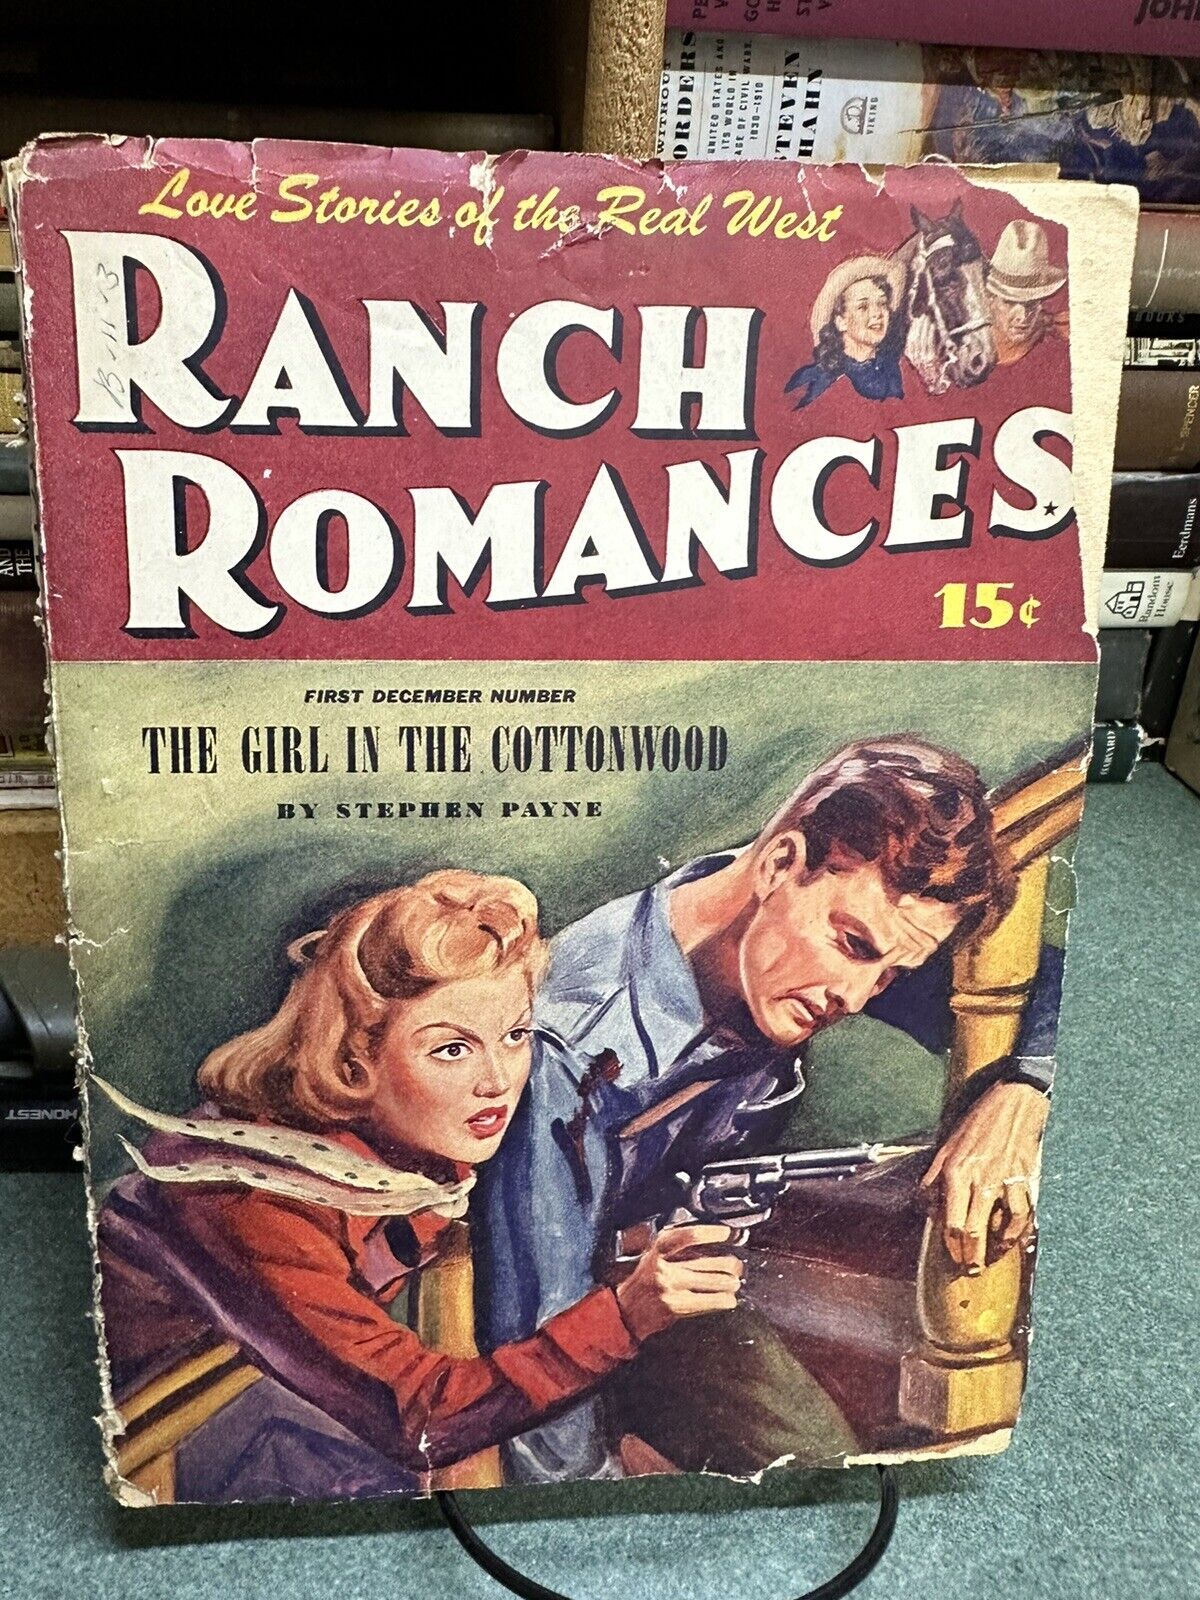 Ranch Romances v123 #1, First Dec. No.  (Dec. 1), 1944. “Girl in the Cottonwood”